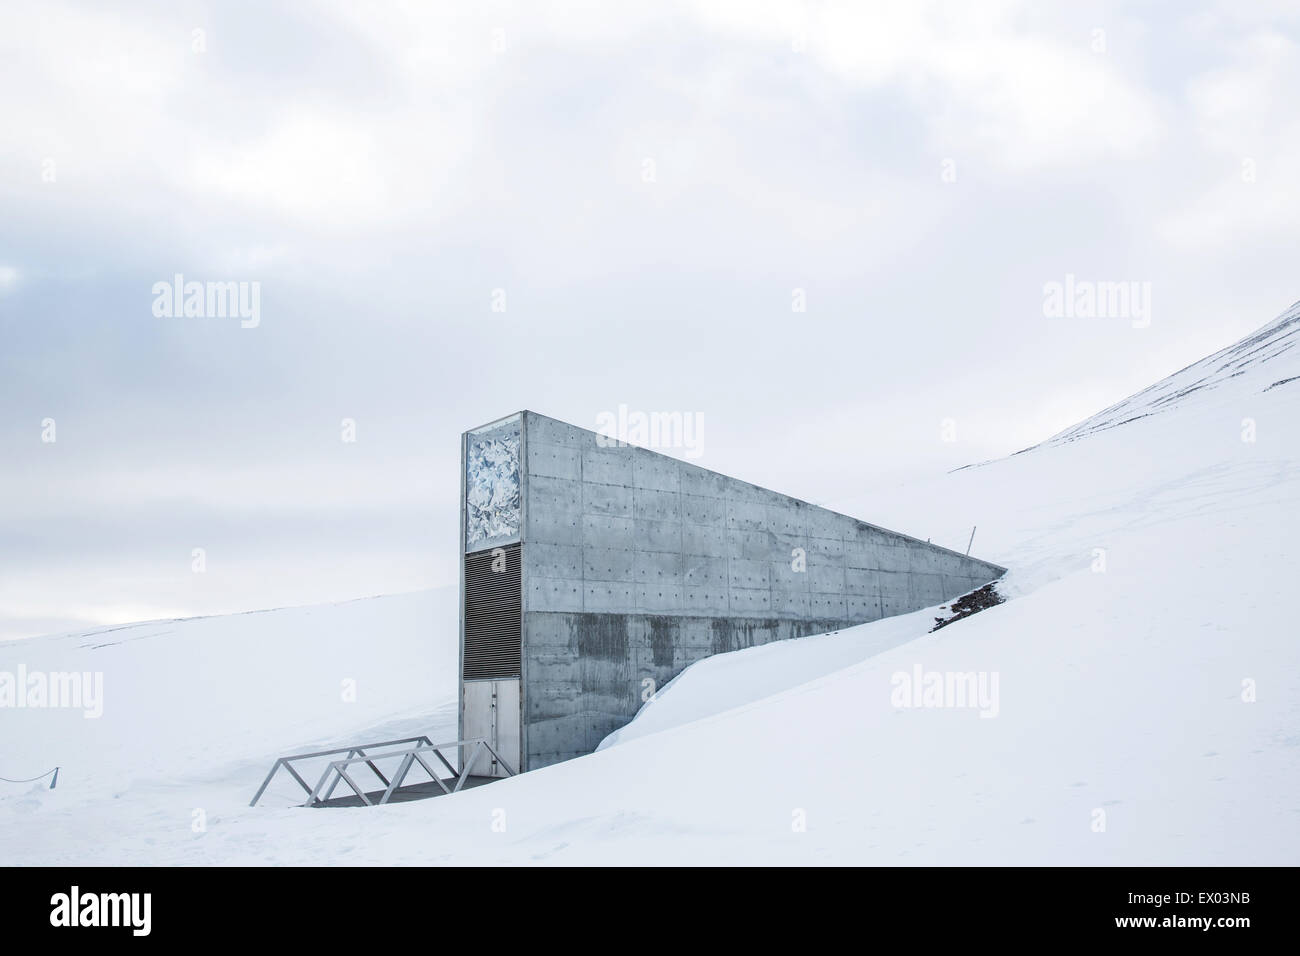 Svalbard Seed Vault High Resolution Stock Photography And Images Alamy